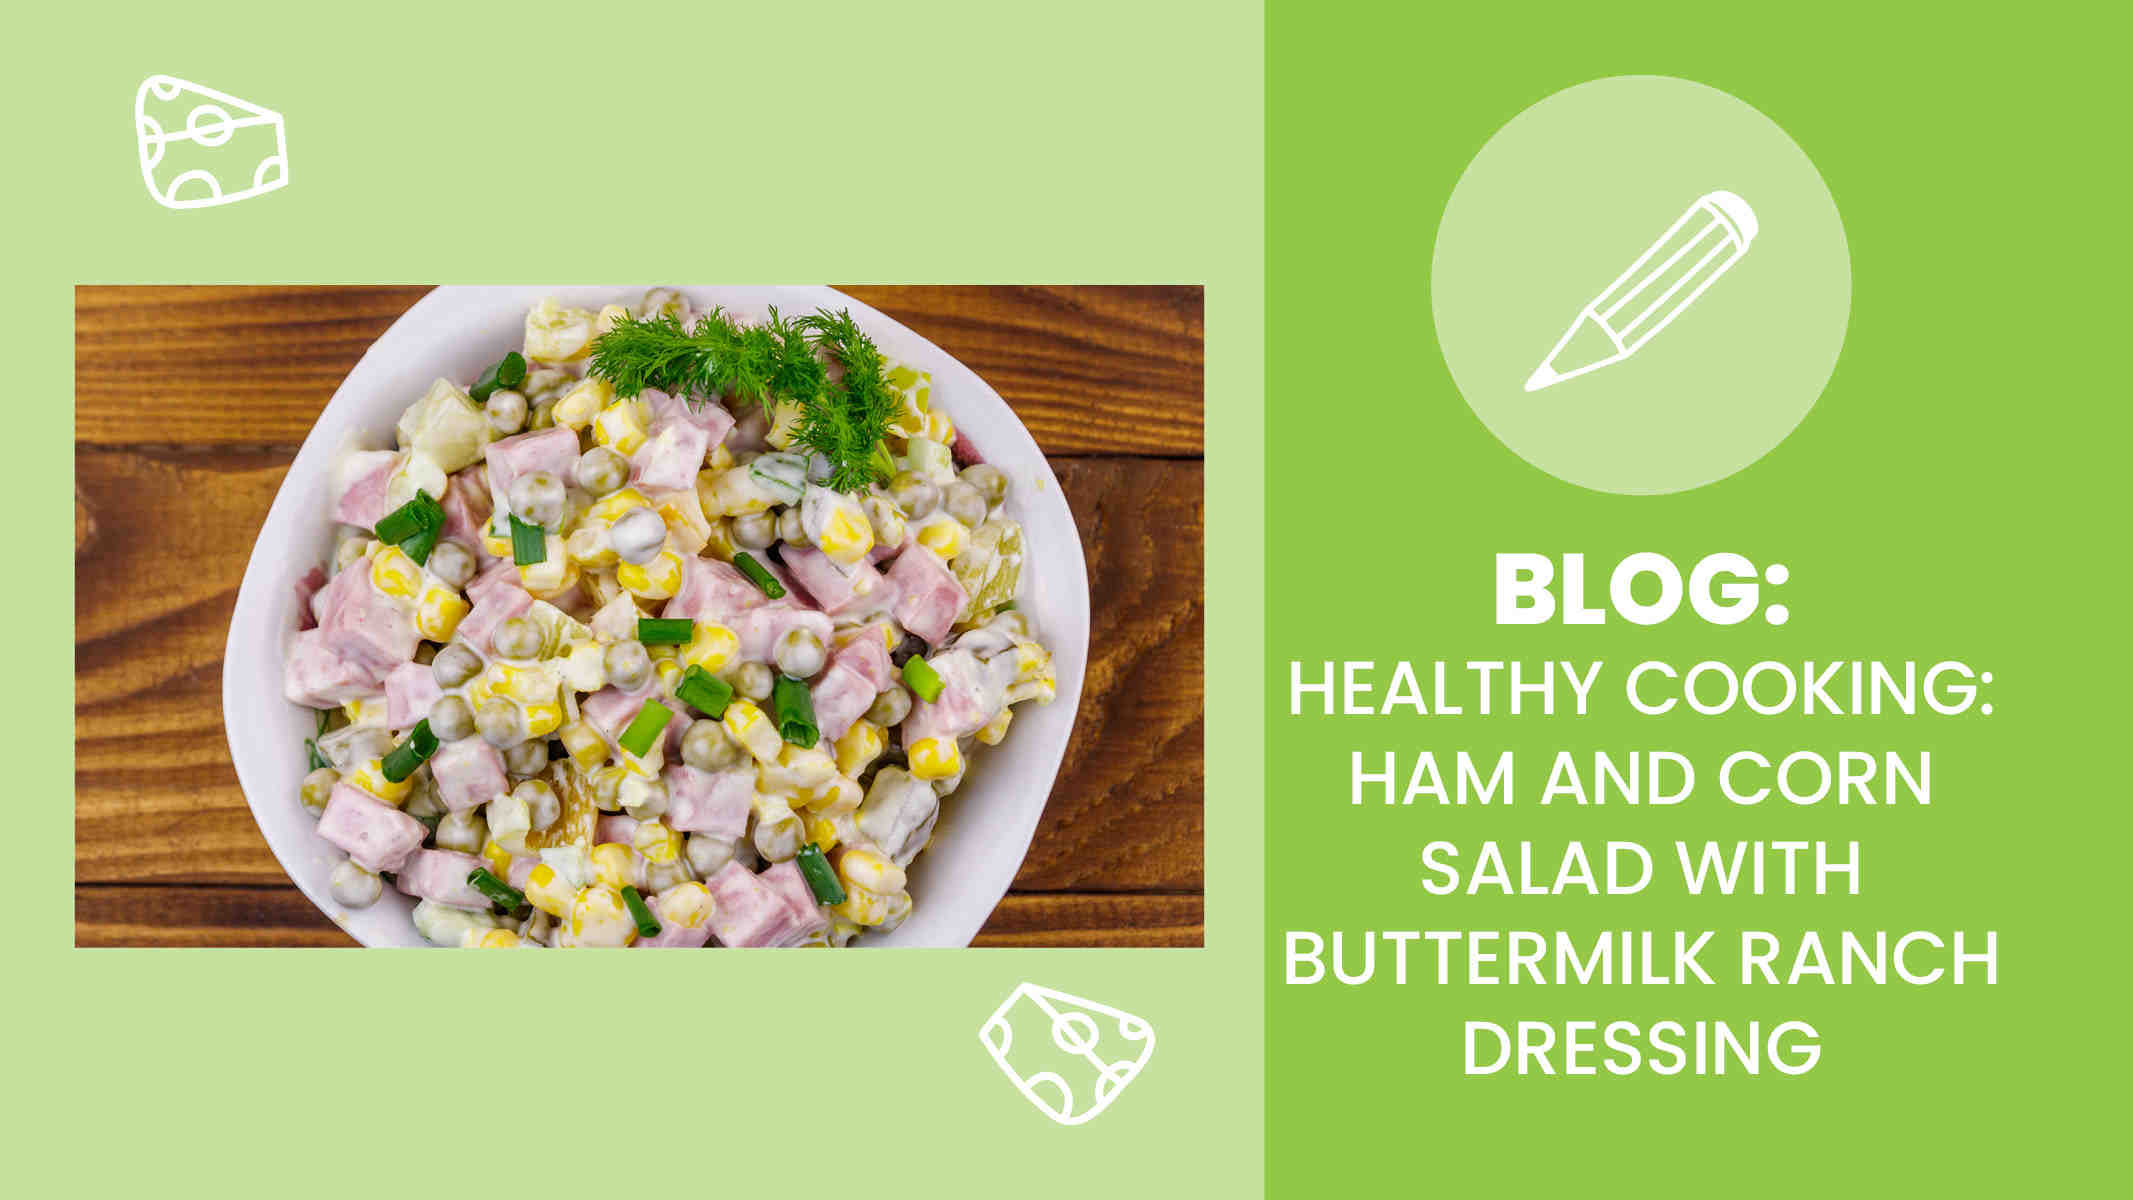 Is ham and cheese healthy?